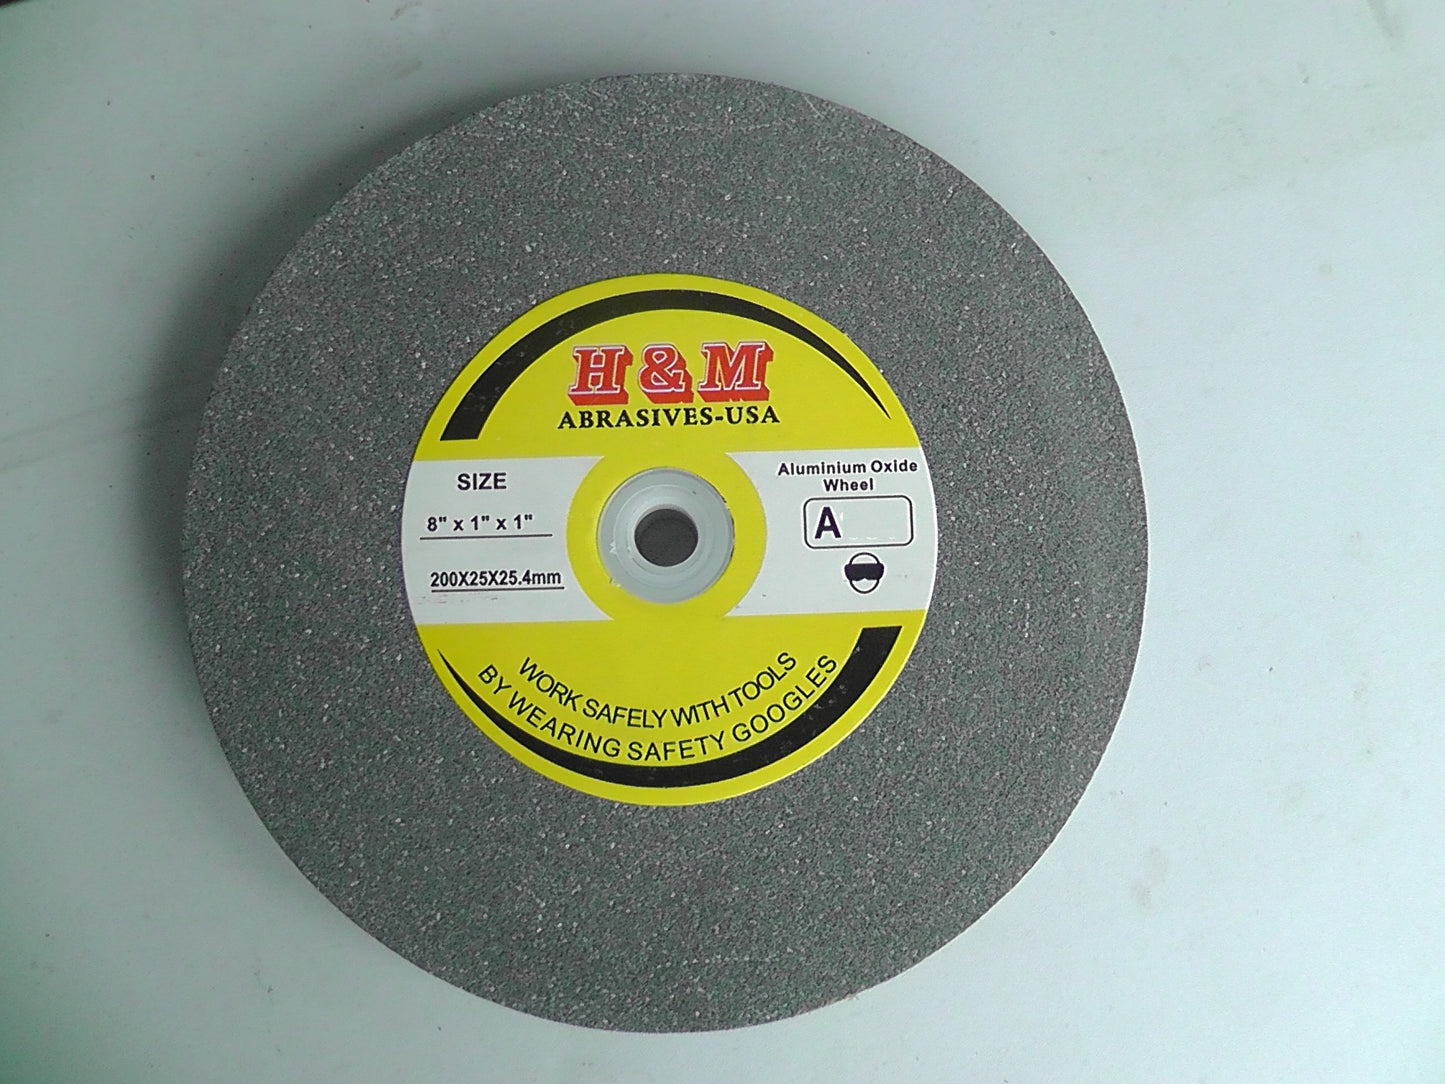 8 inch BENCH GRINDING WHEEL VITRIFIED 8" x 1" x 1" A/O IN 46 60 100 Grit Bench Grinder